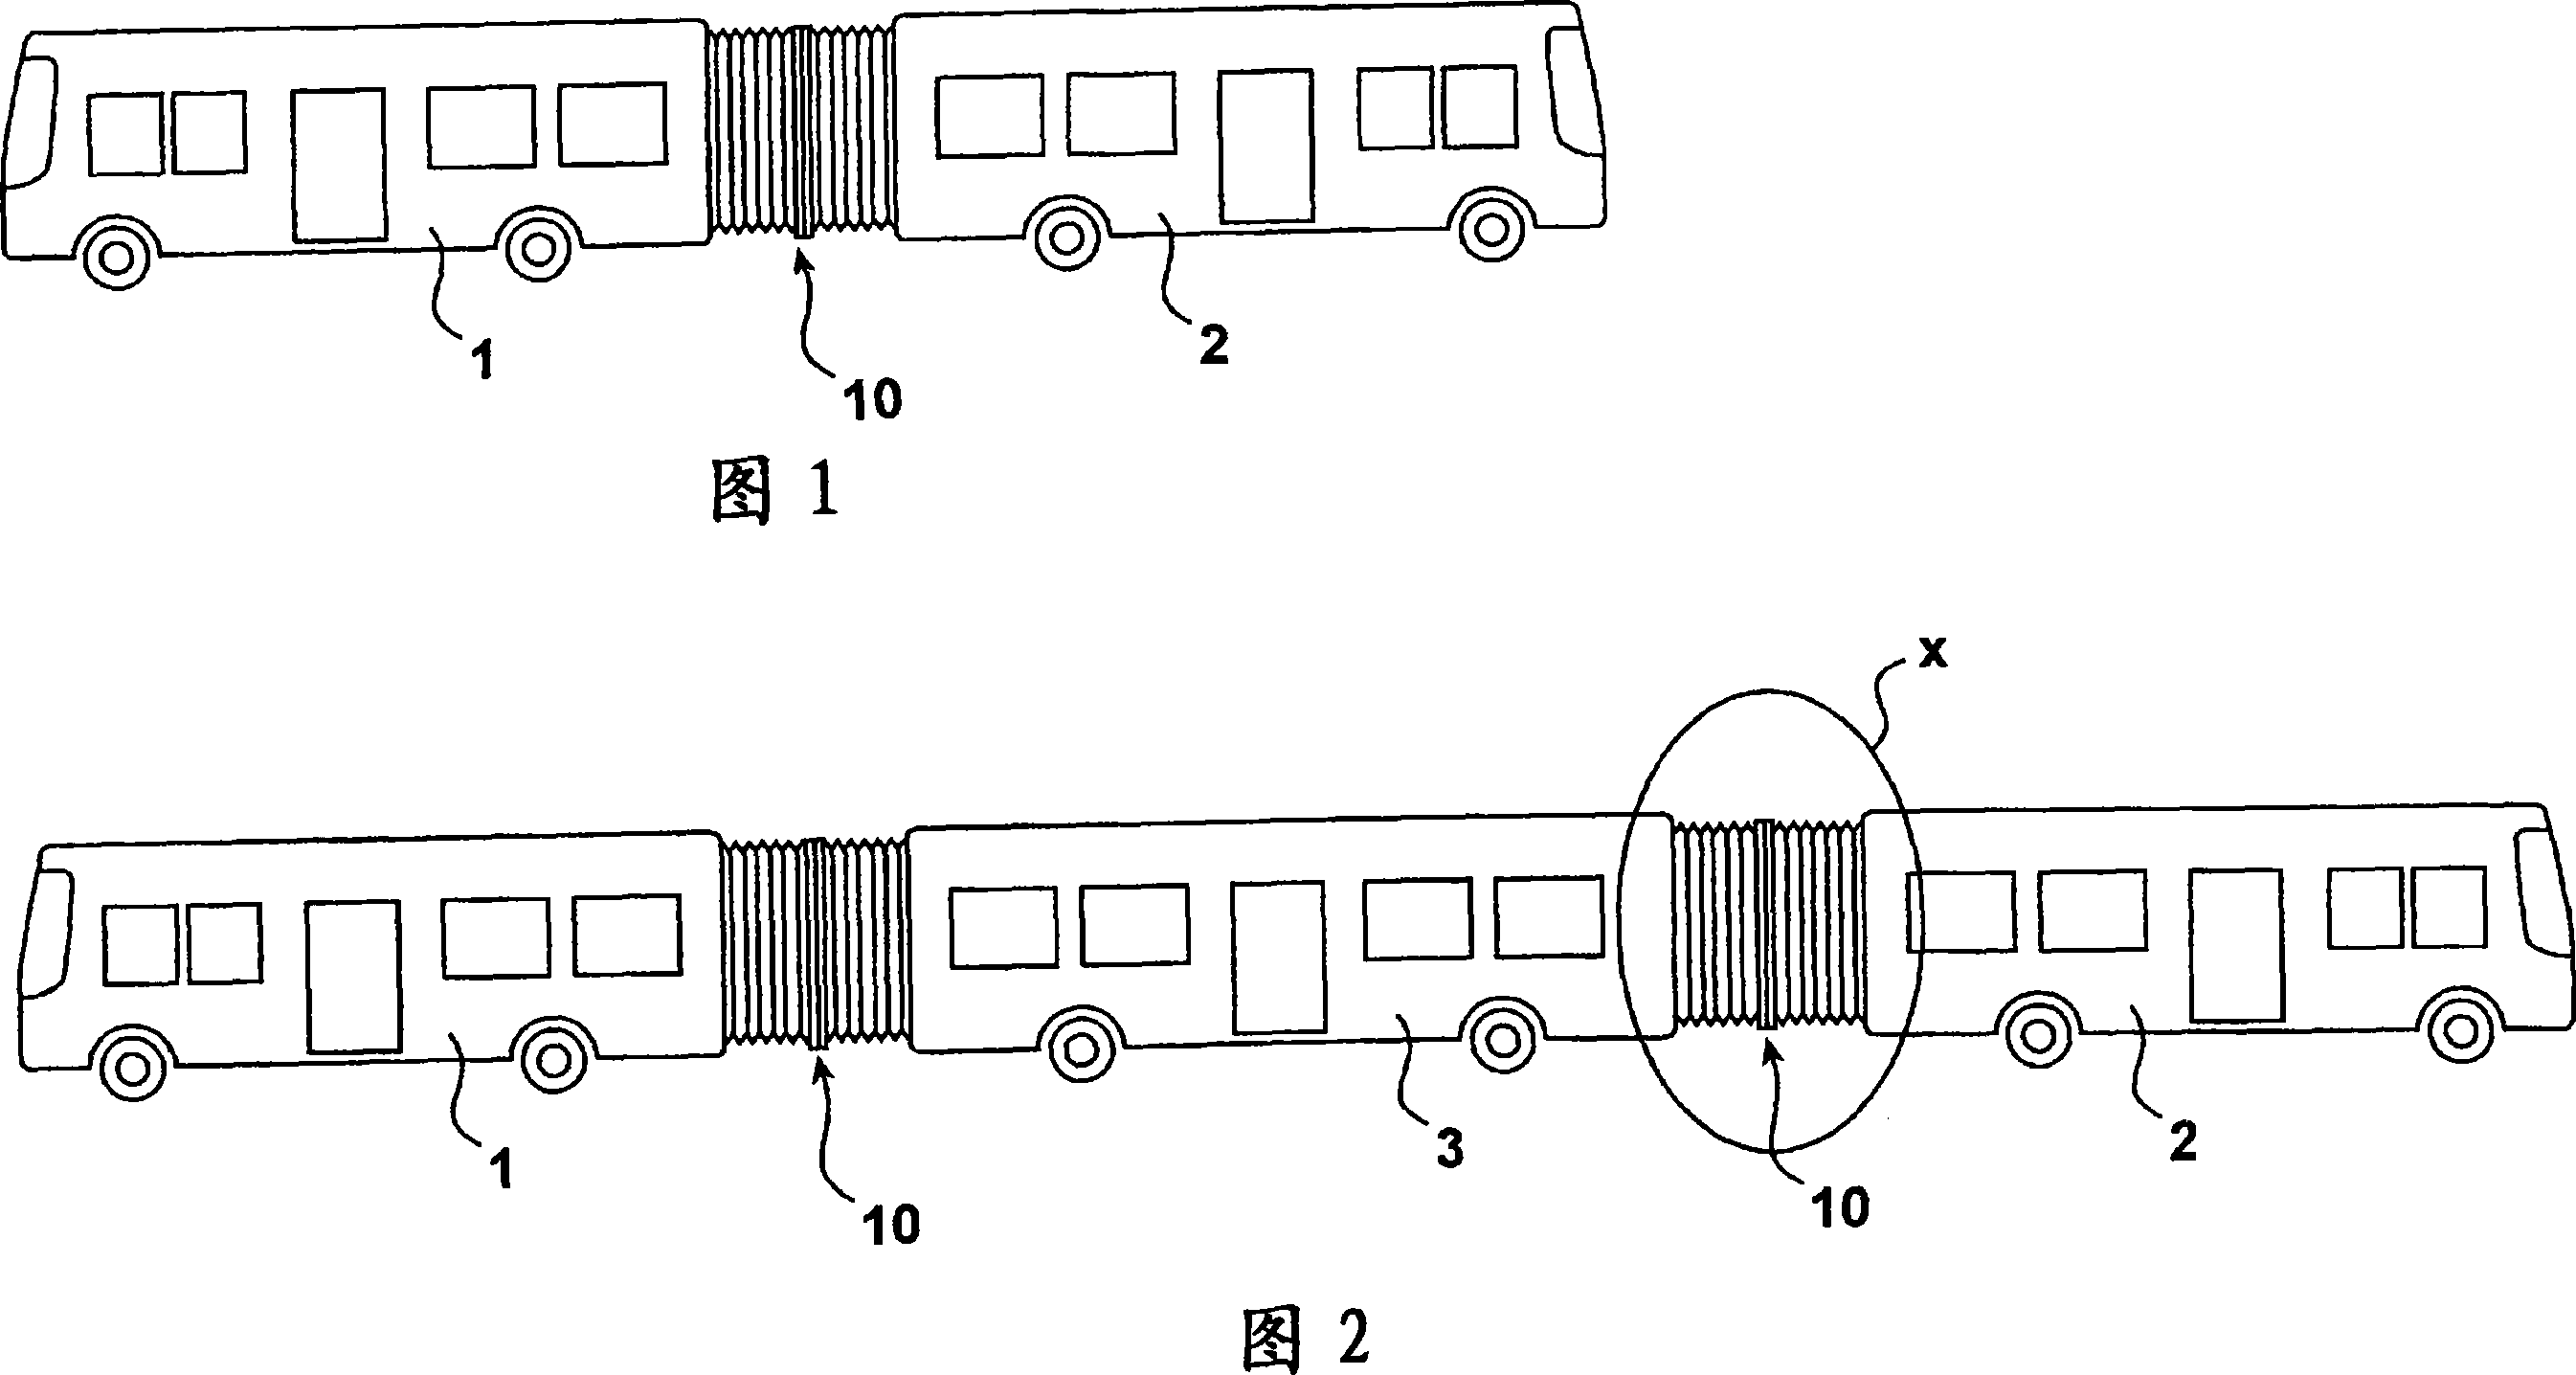 Articulated vehicle composed of several coupled vehicle sections